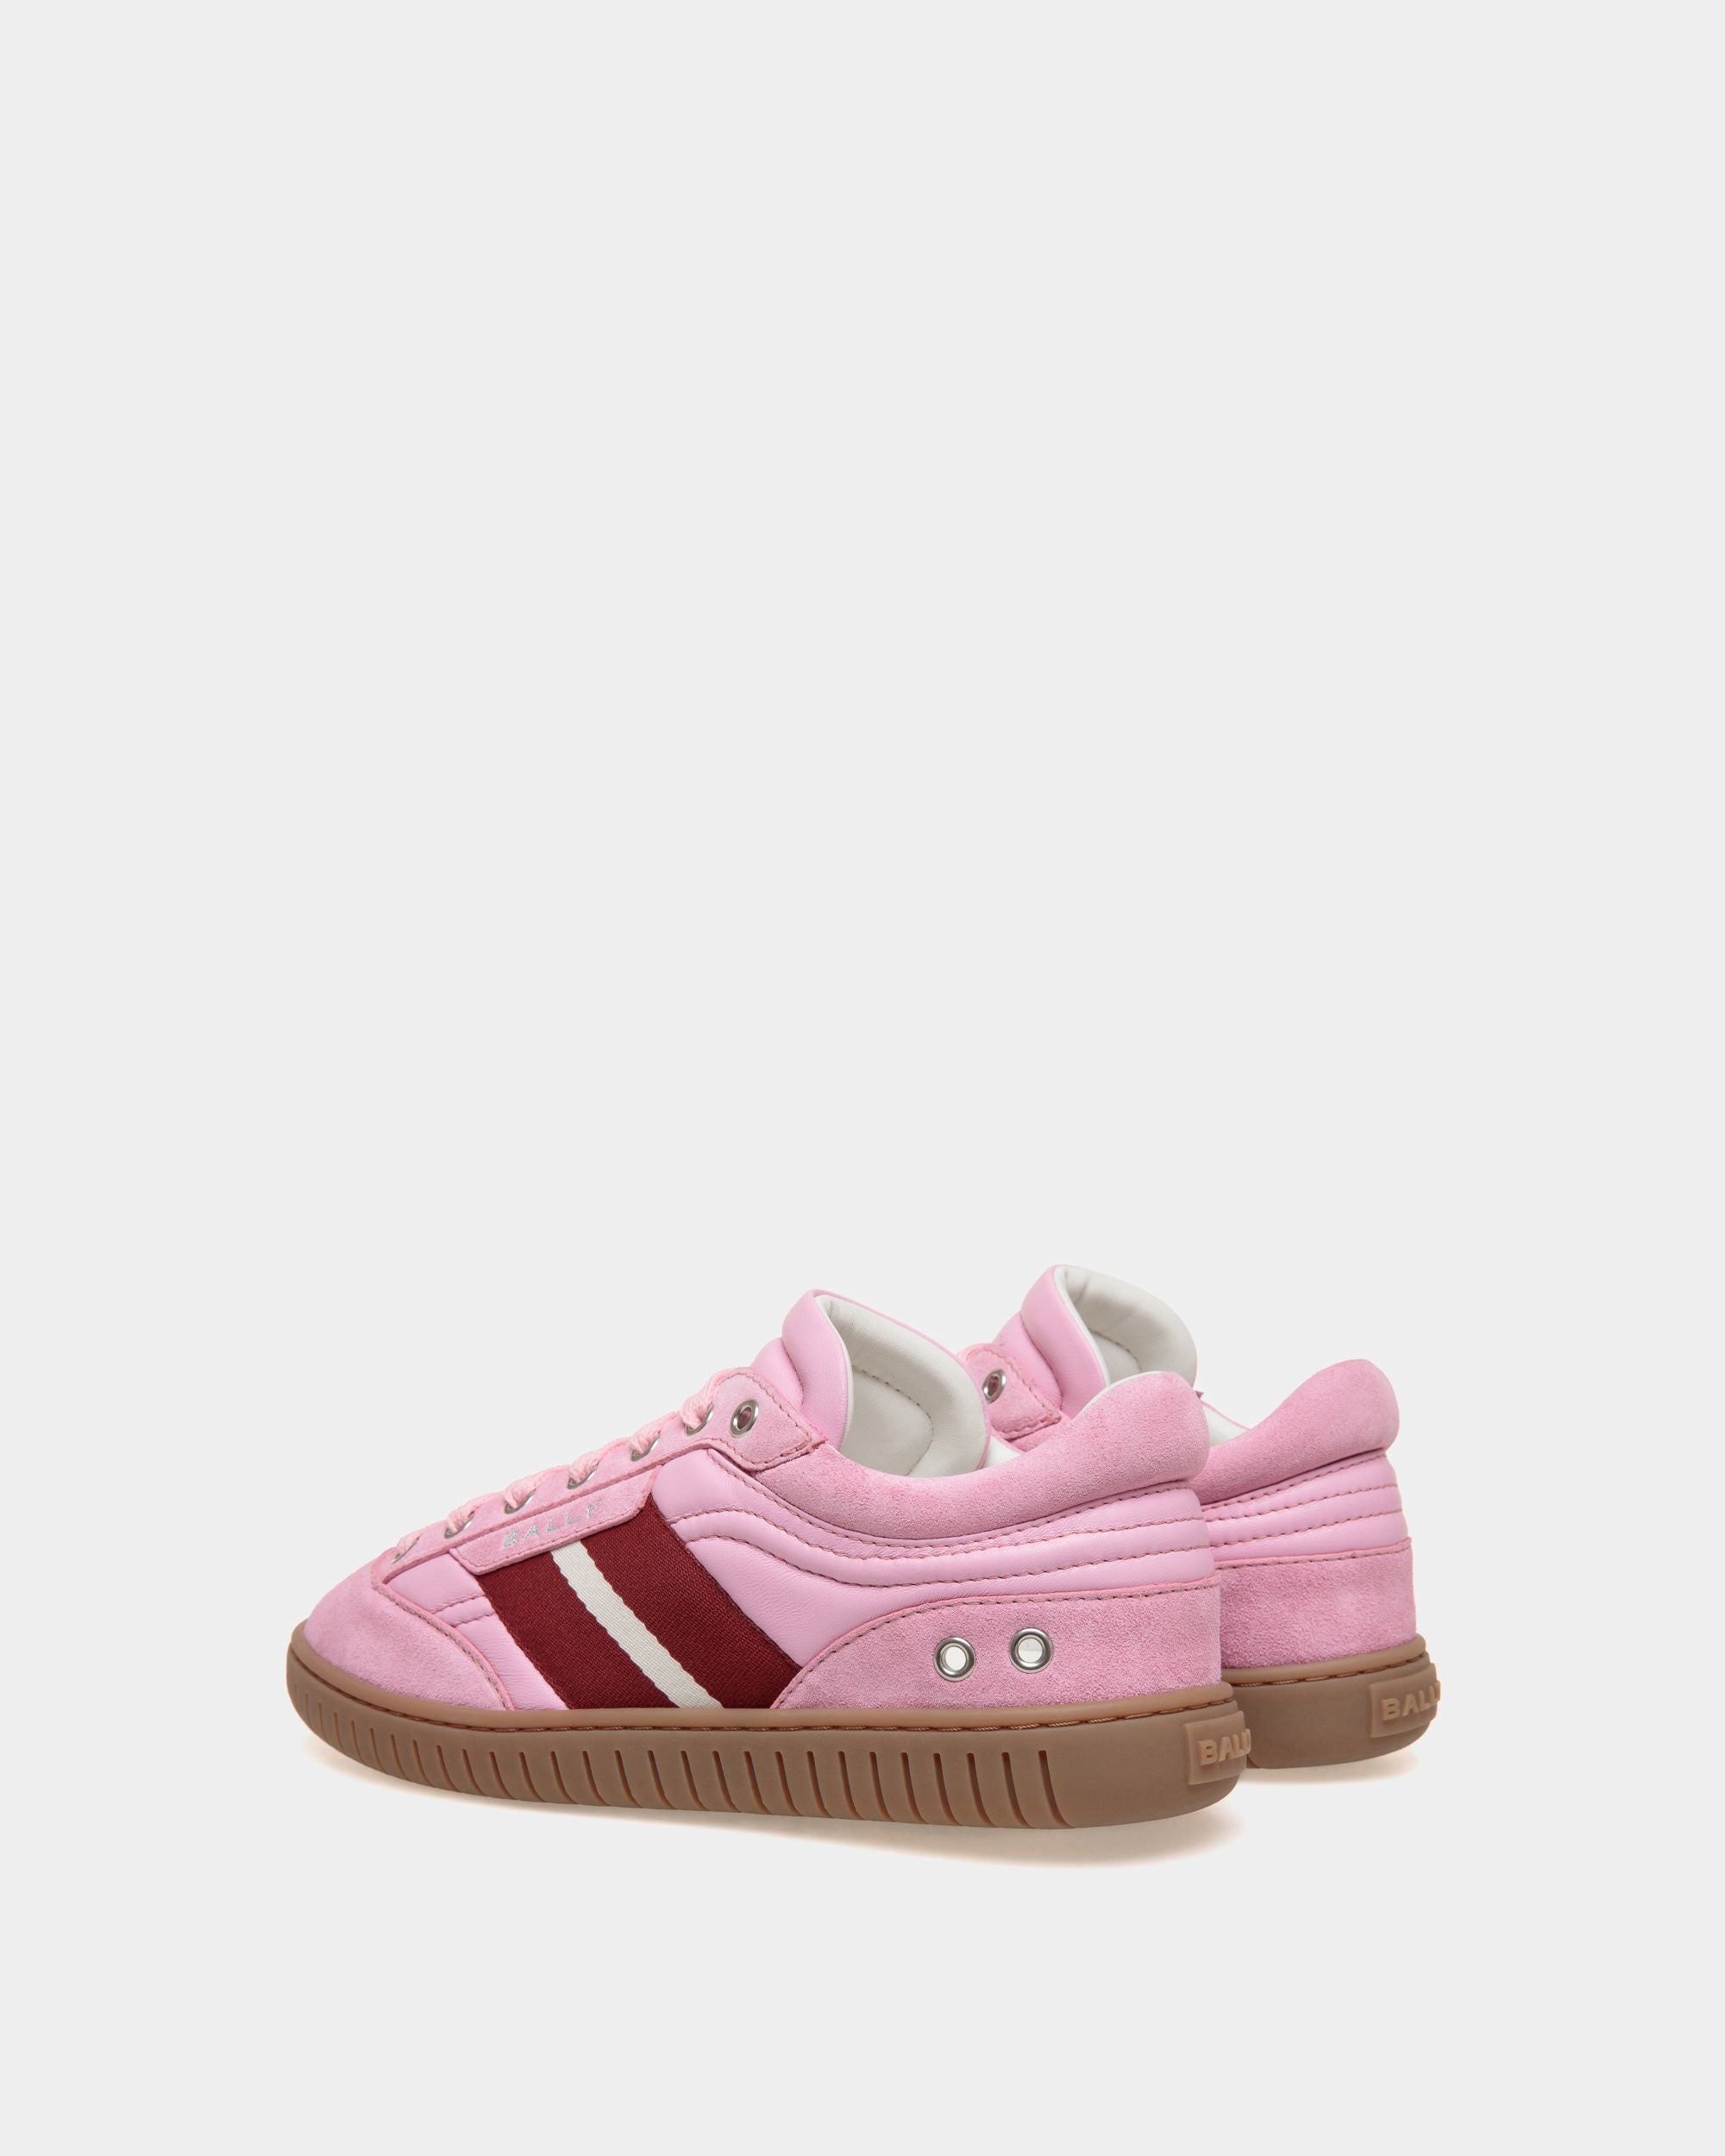 Player | Women's Sneaker in Pink Leather and Suede | Bally | Still Life 3/4 Back